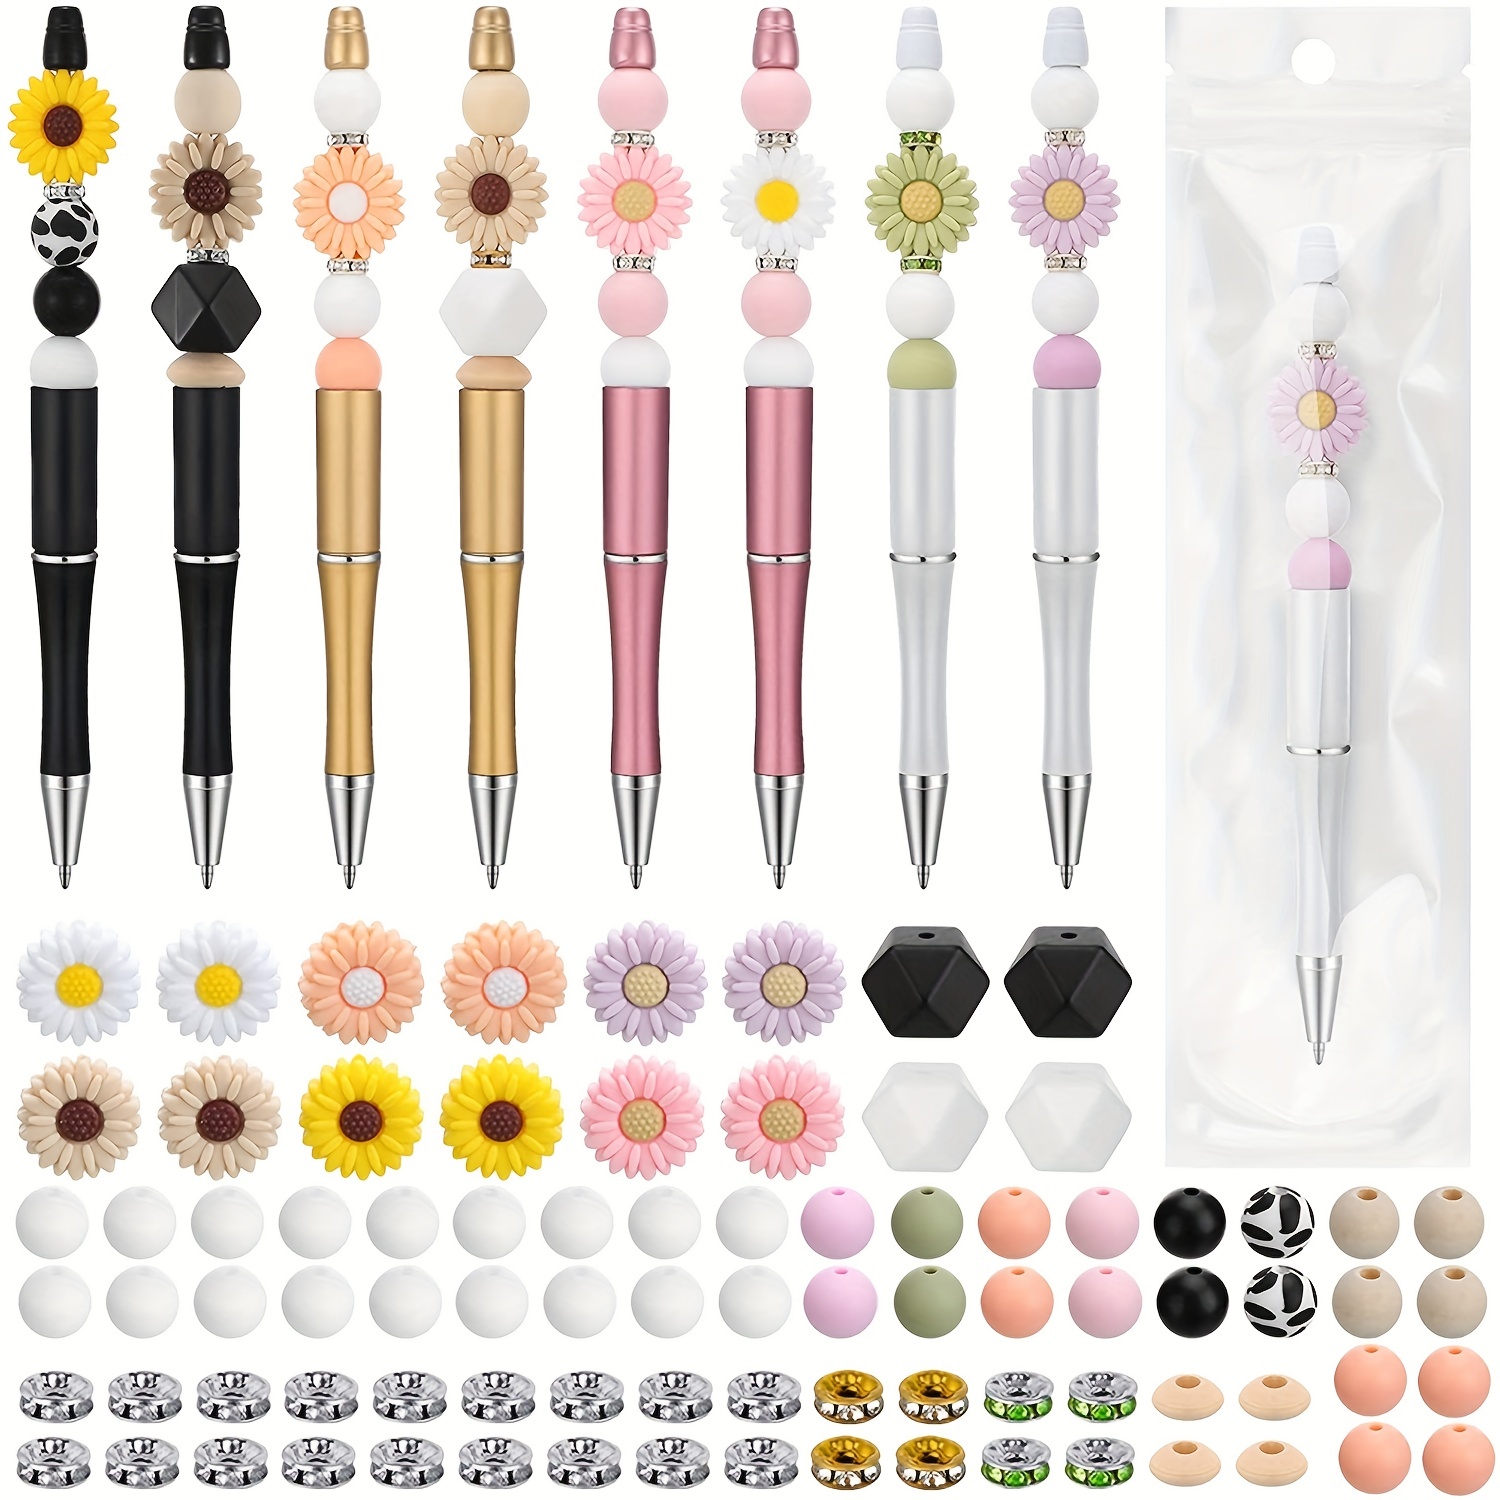 10 Pcs Valentine's Day Beadable Pen Assorted Bead Pen and 40 Pcs Multicolor  Beads Crystal Spacer Beads DIY Bead Ballpoint Pen Black Ink Ball Pen for